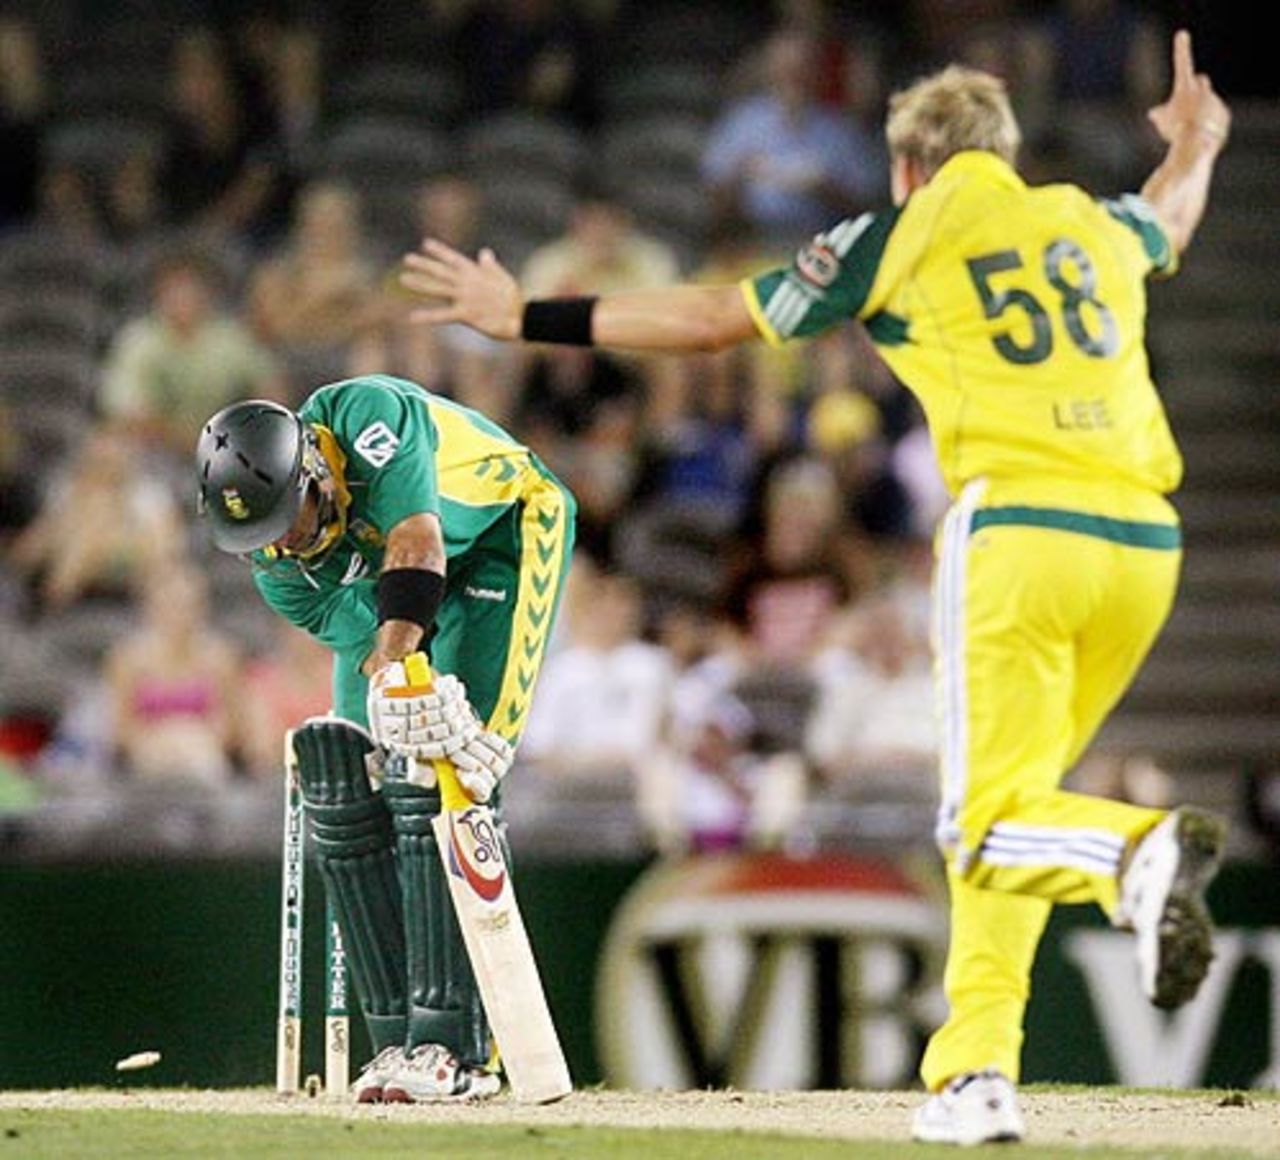 Brett Lee cleans up Justin Kemp to claim his fifth wicket of the innings, Australia v South Africa, VB Series, Telstra Dome, Melbourne, January 20, 2006